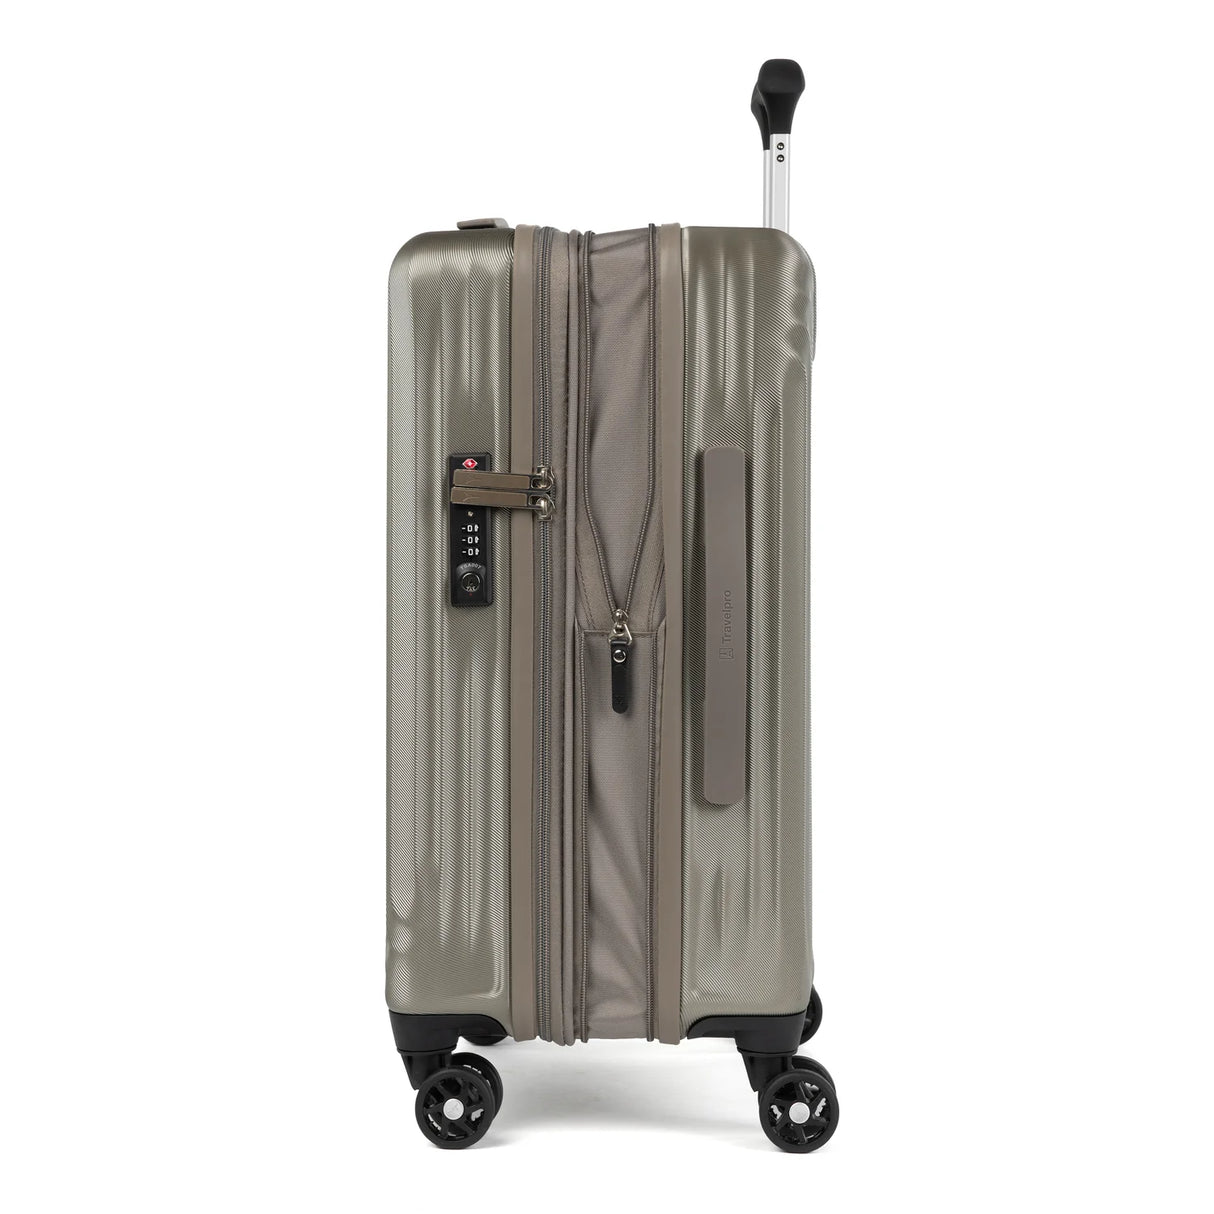 Travelpro Maxlite Air Carry-On Expandable Hardside Spinner , , 401229135_side2-1500x1500-d707c29_1024x1024_2x_4dee74d5-1db3-46d6-8da8-1df7acb0d447